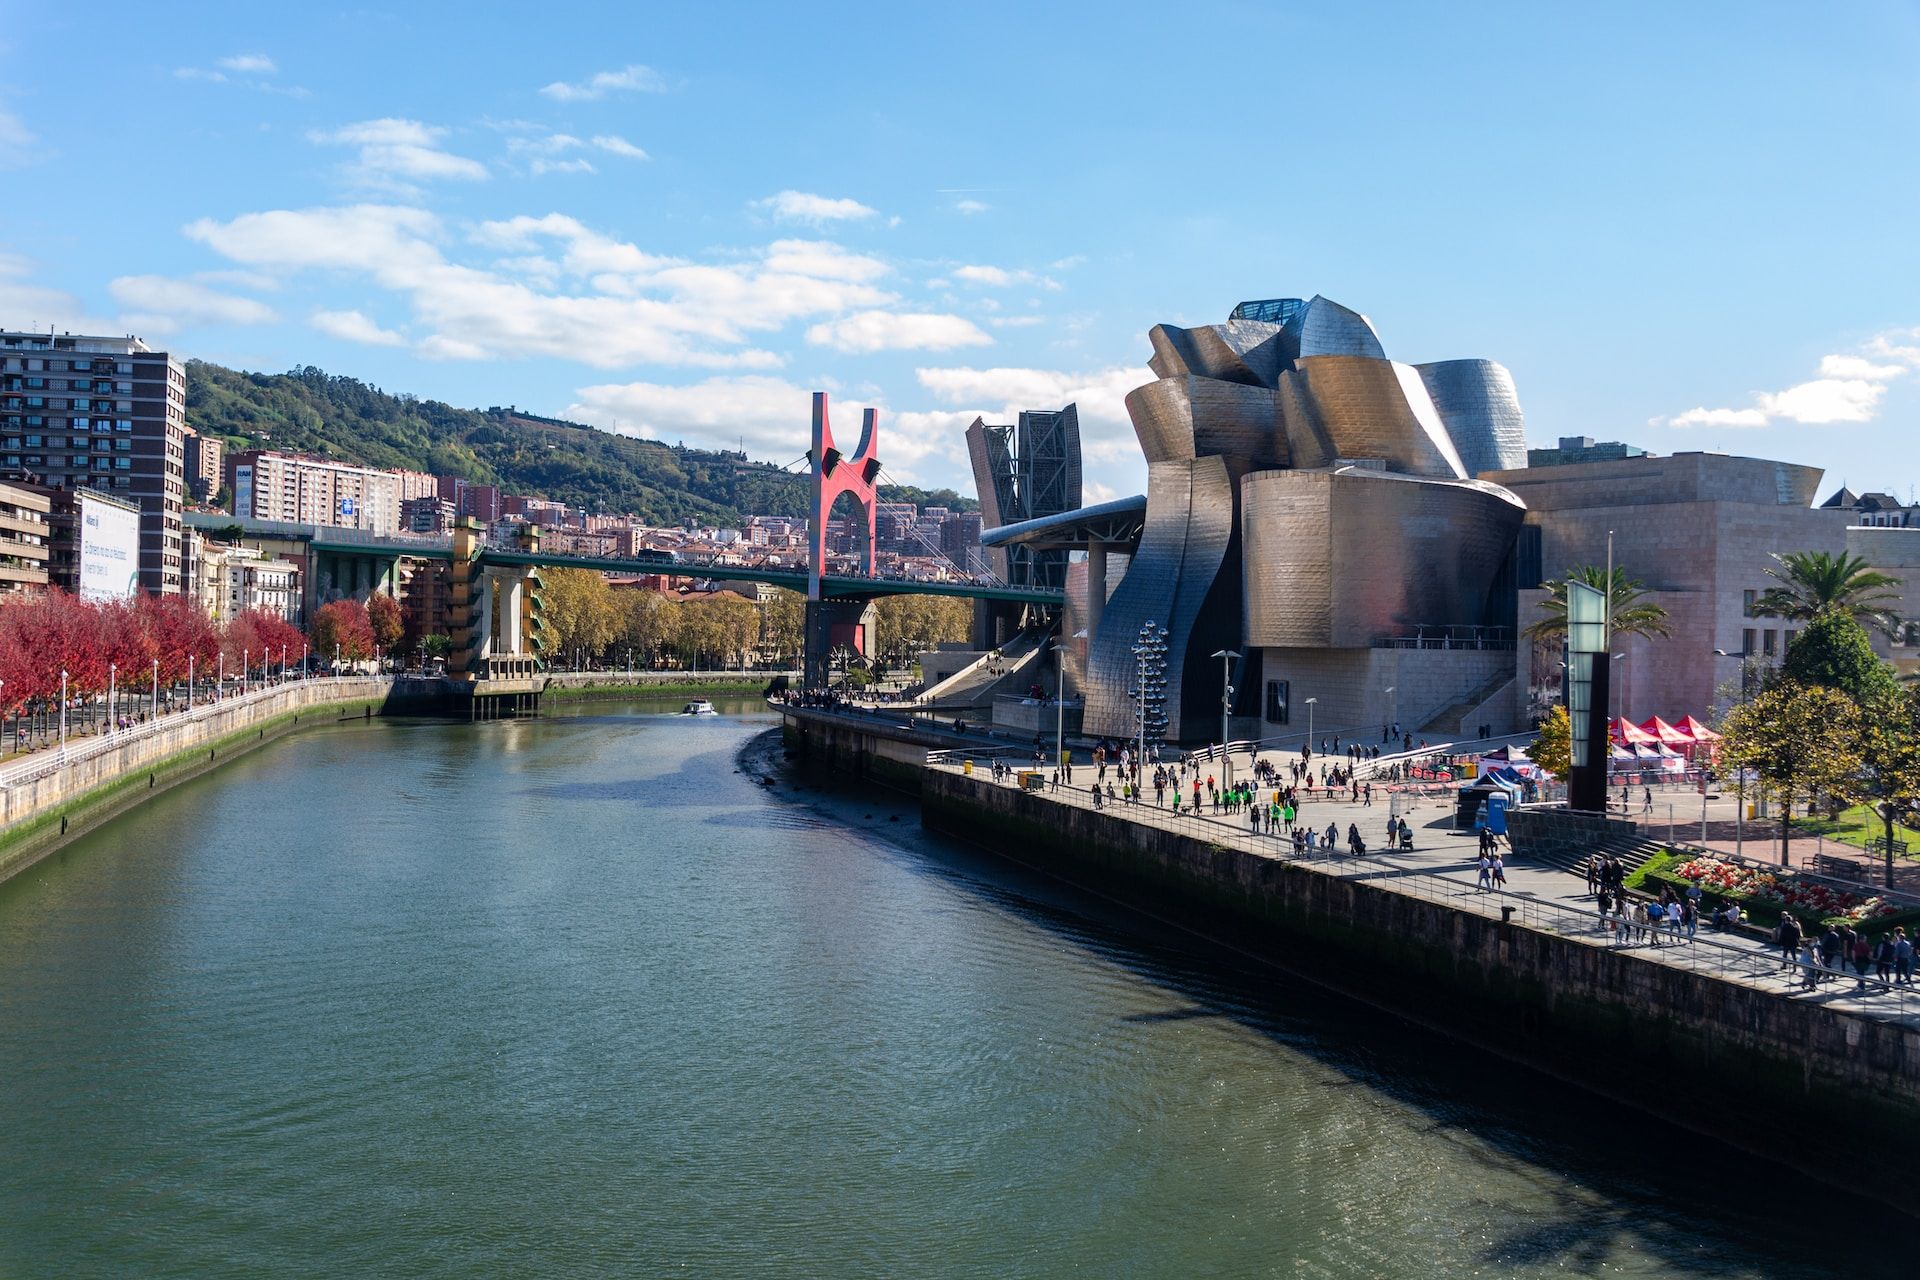 Bilbao or San Sebastian: Which One To Choose For A Few Days?